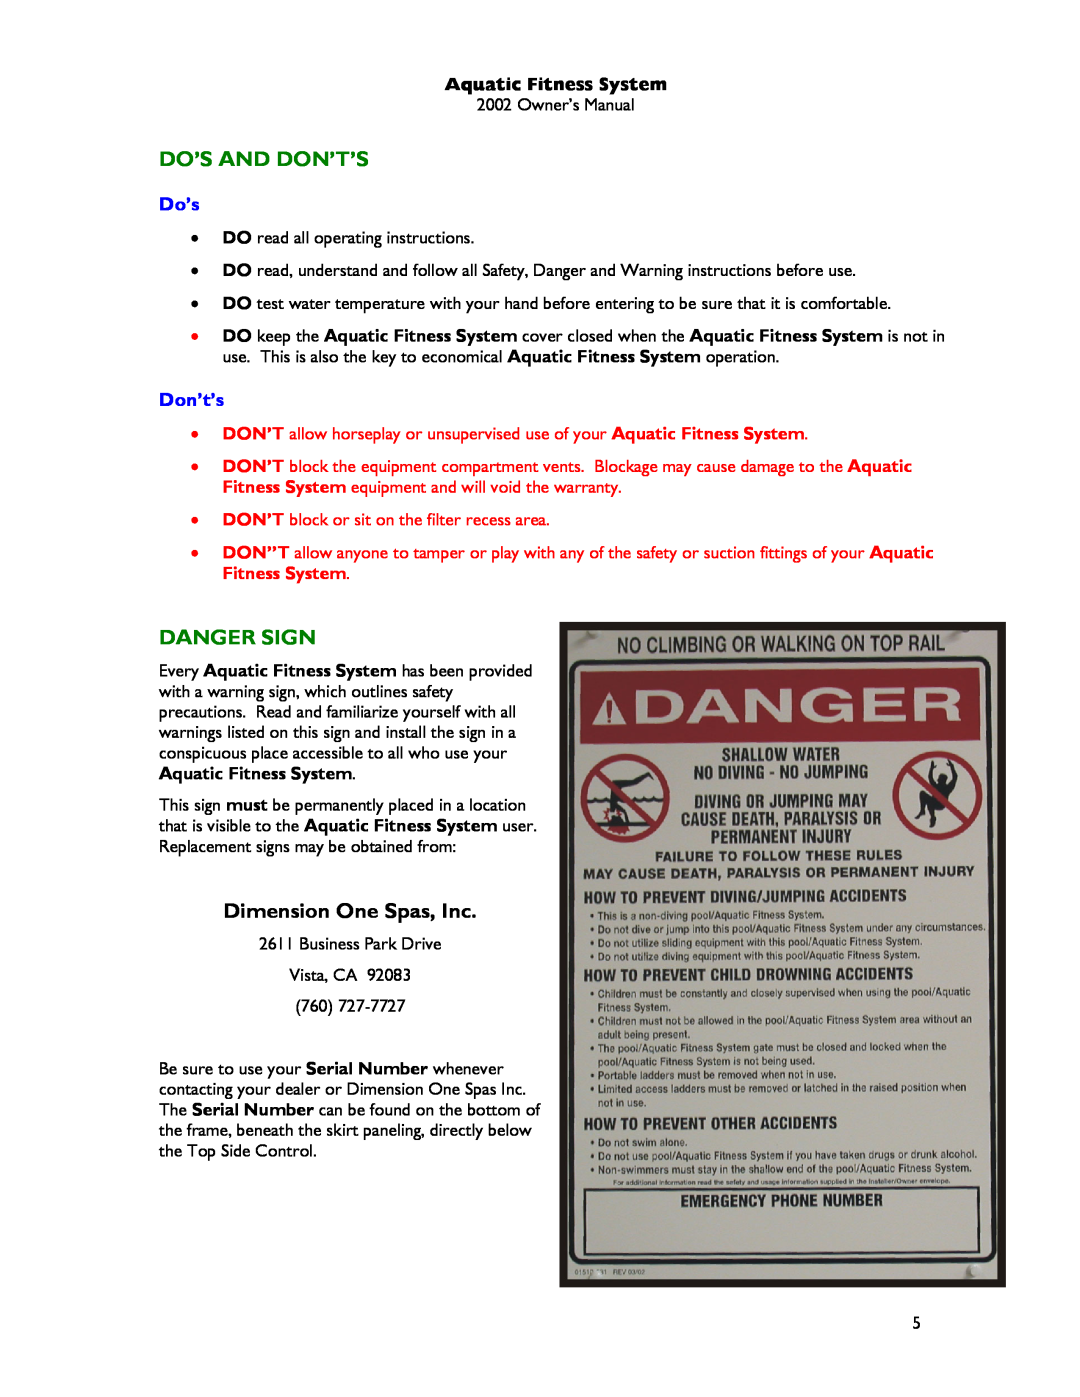 Dimension One Spas Aquatic Fitness System owner manual Do’S And Don’T’S, Danger Sign, Dimension One Spas, Inc 